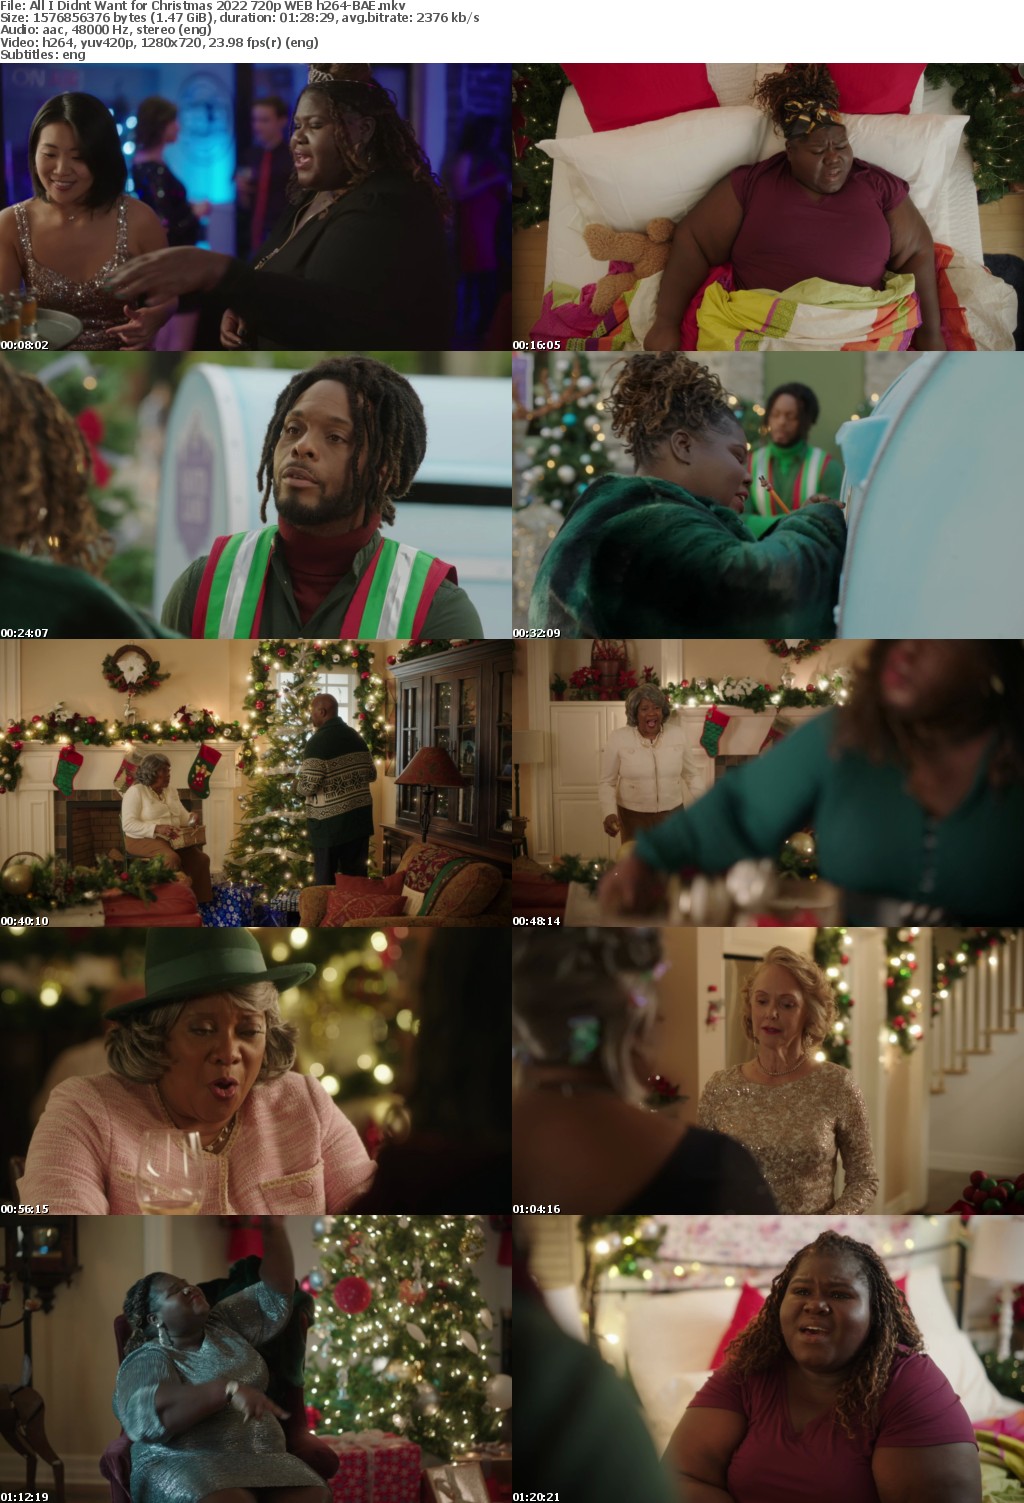 All I Didnt Want For Christmas 2022 720p WEB H264-BAE